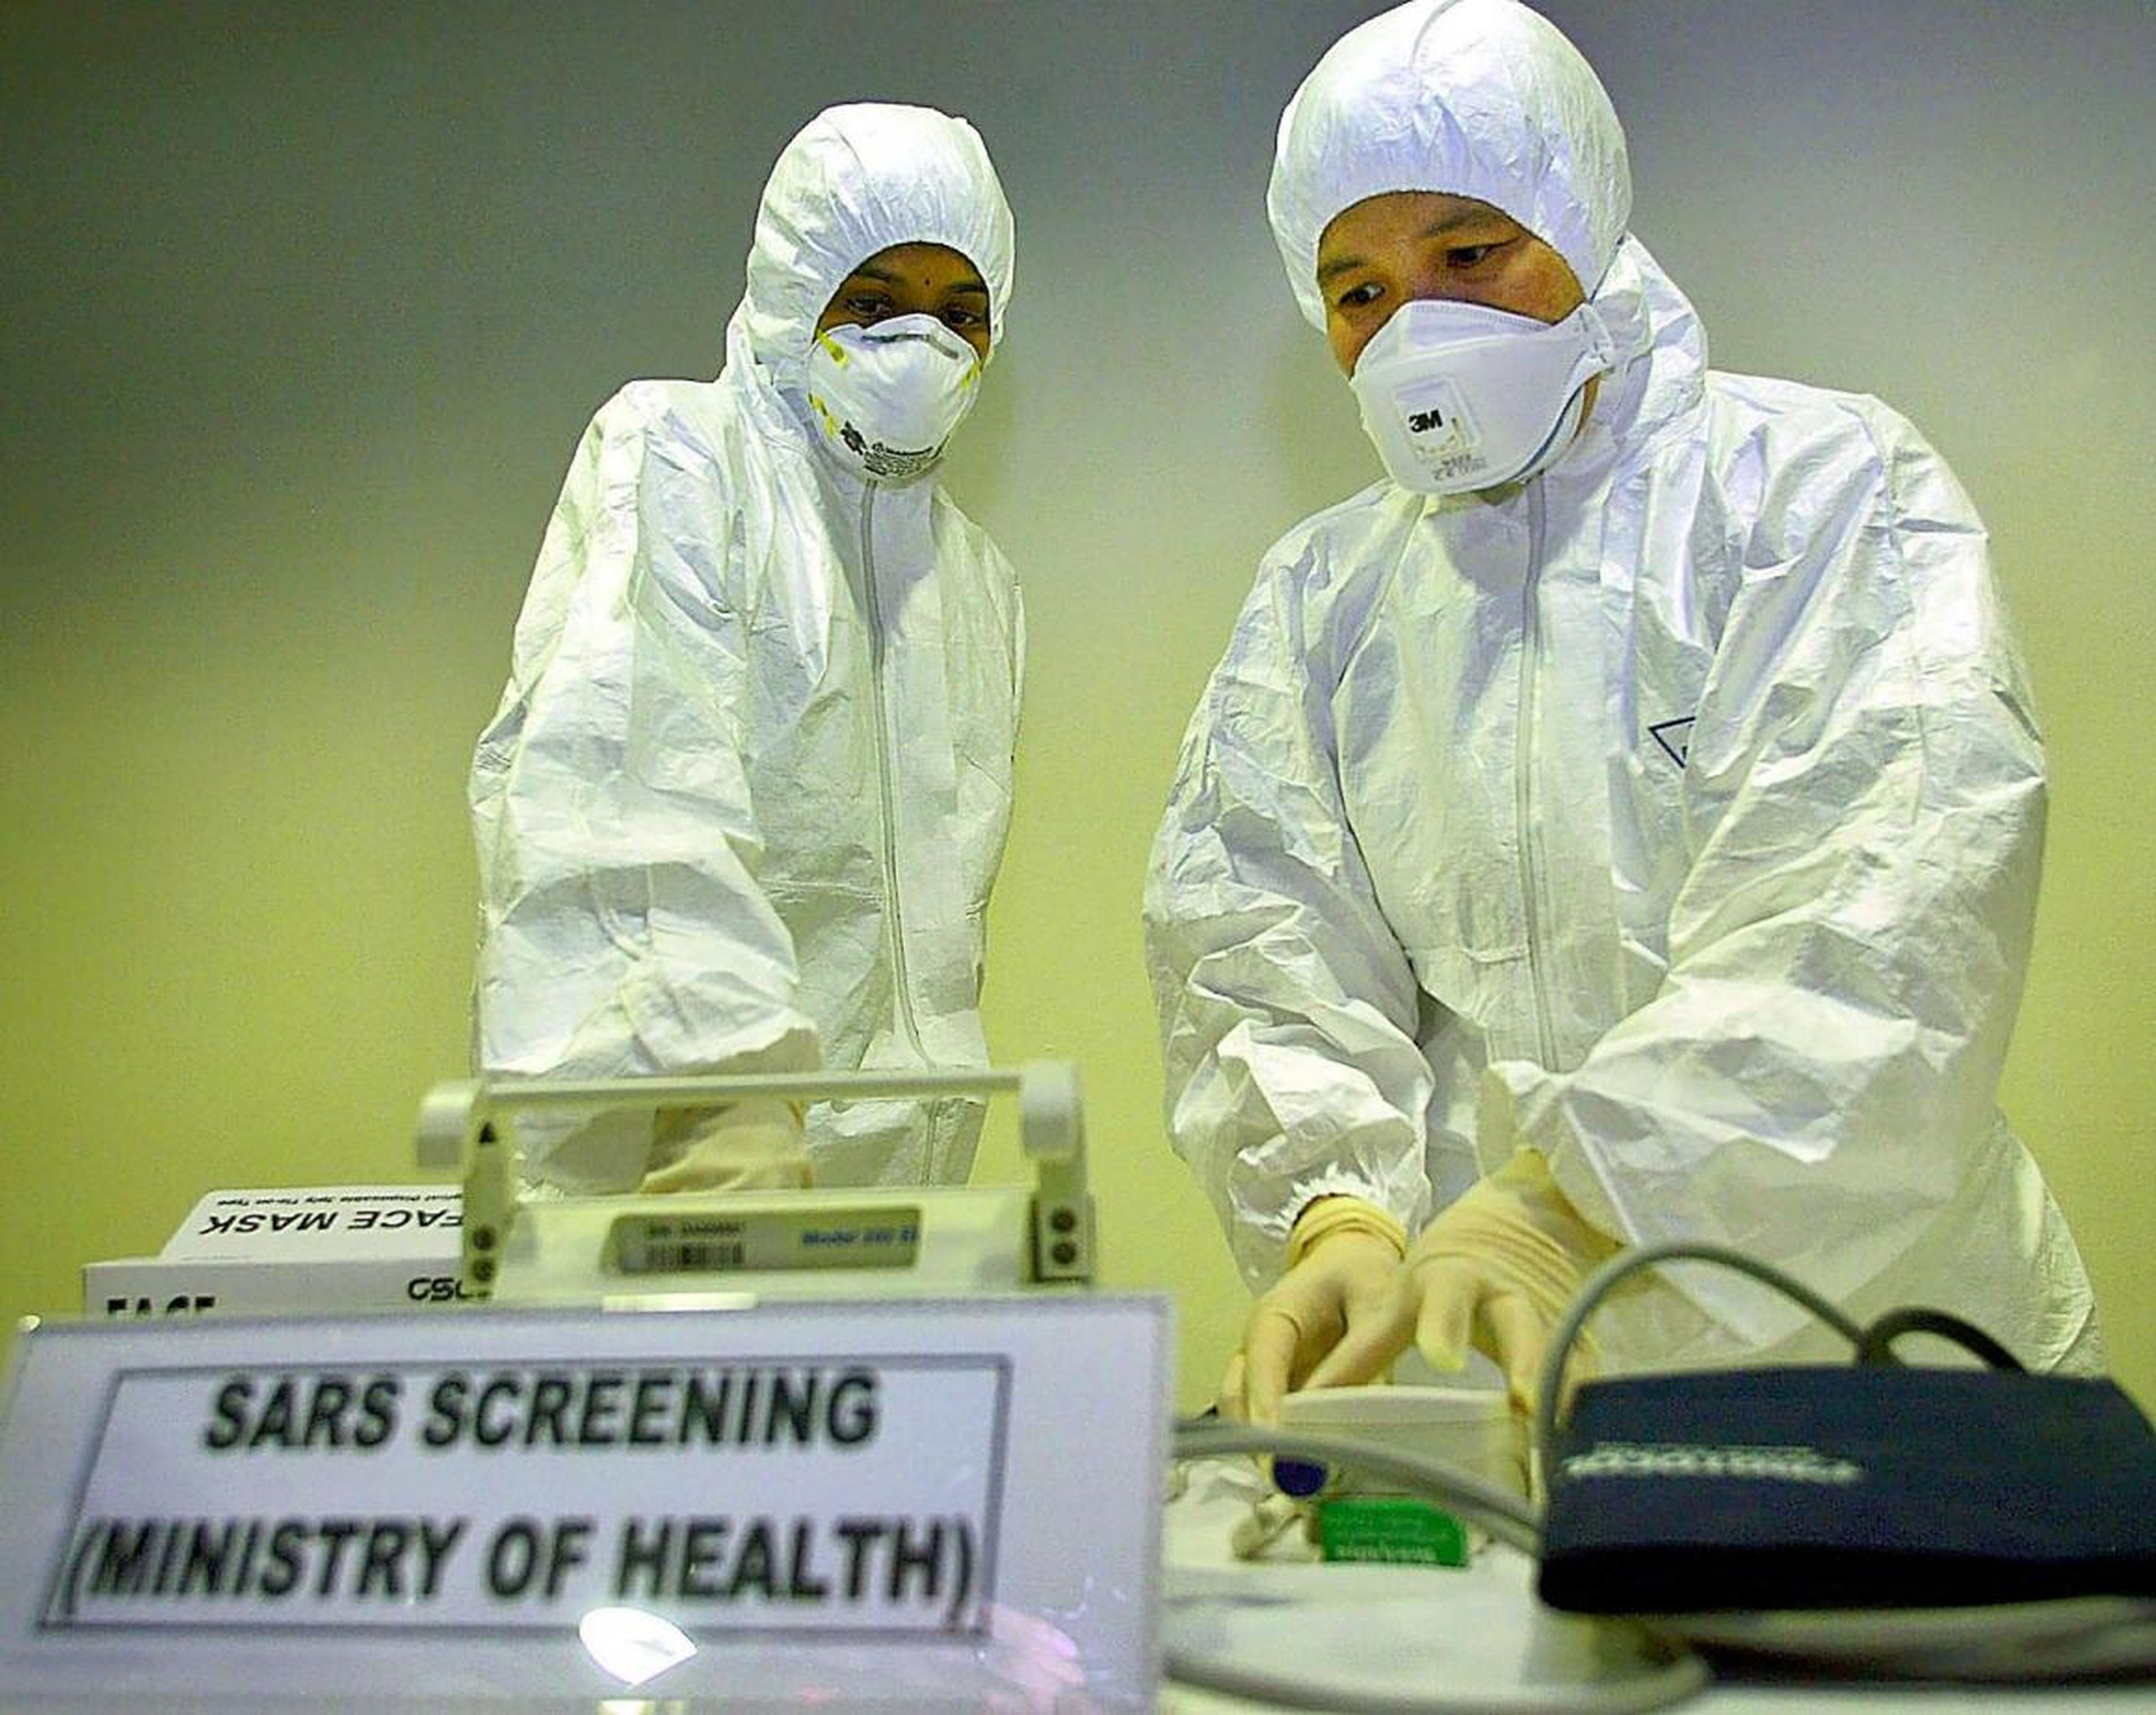 A doctor checking equipment at a SARS screening room at Kuala Lumpur International Airport in Malaysia in 2003.